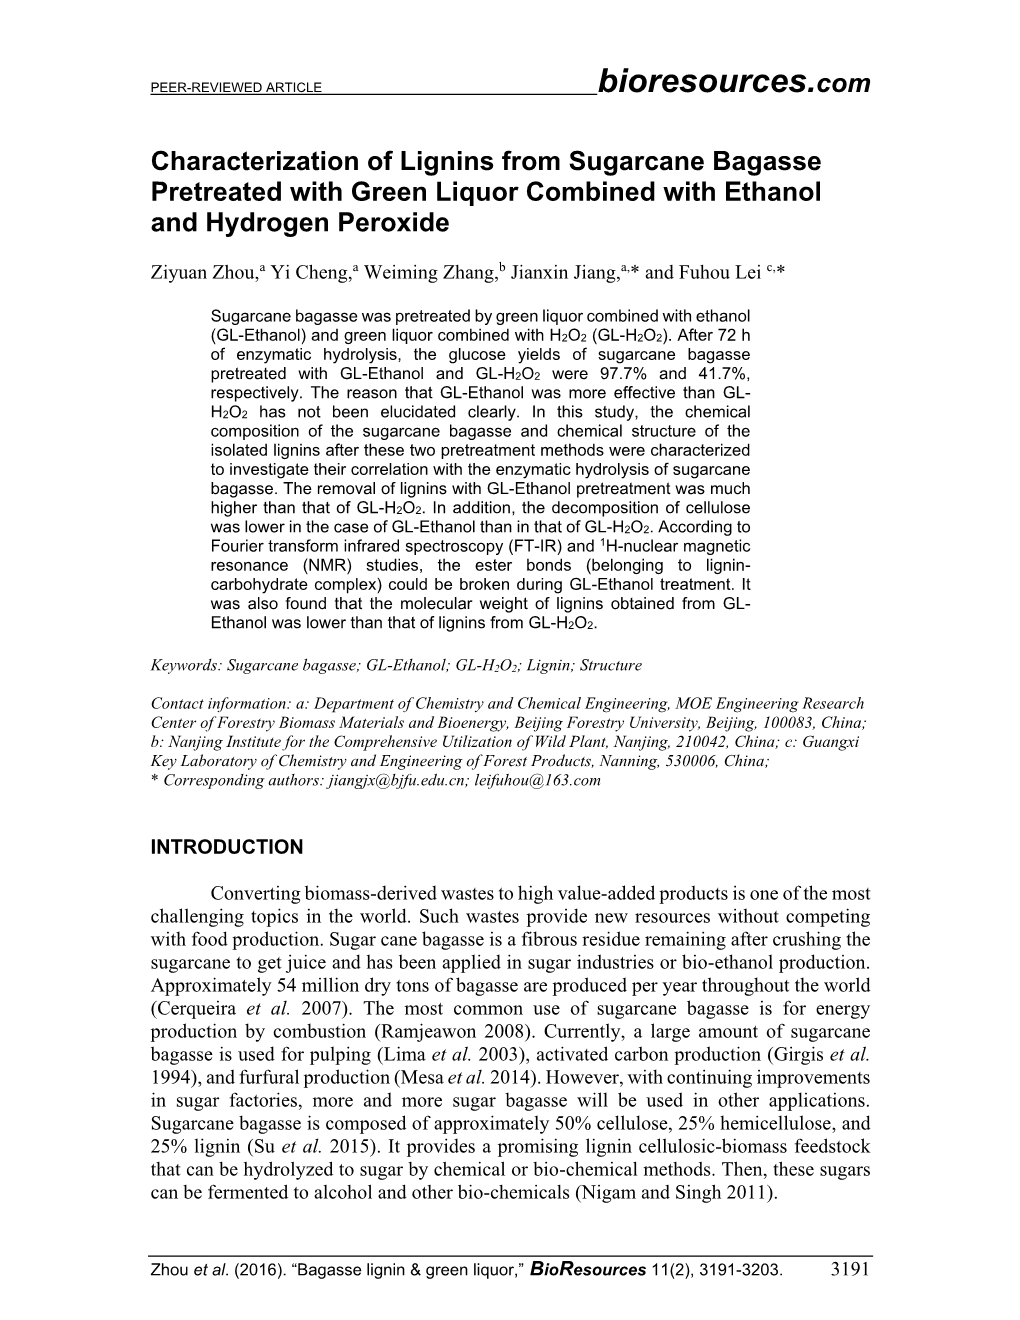 Characterization of Lignins from Sugarcane Bagasse Pretreated with Green Liquor Combined with Ethanol and Hydrogen Peroxide